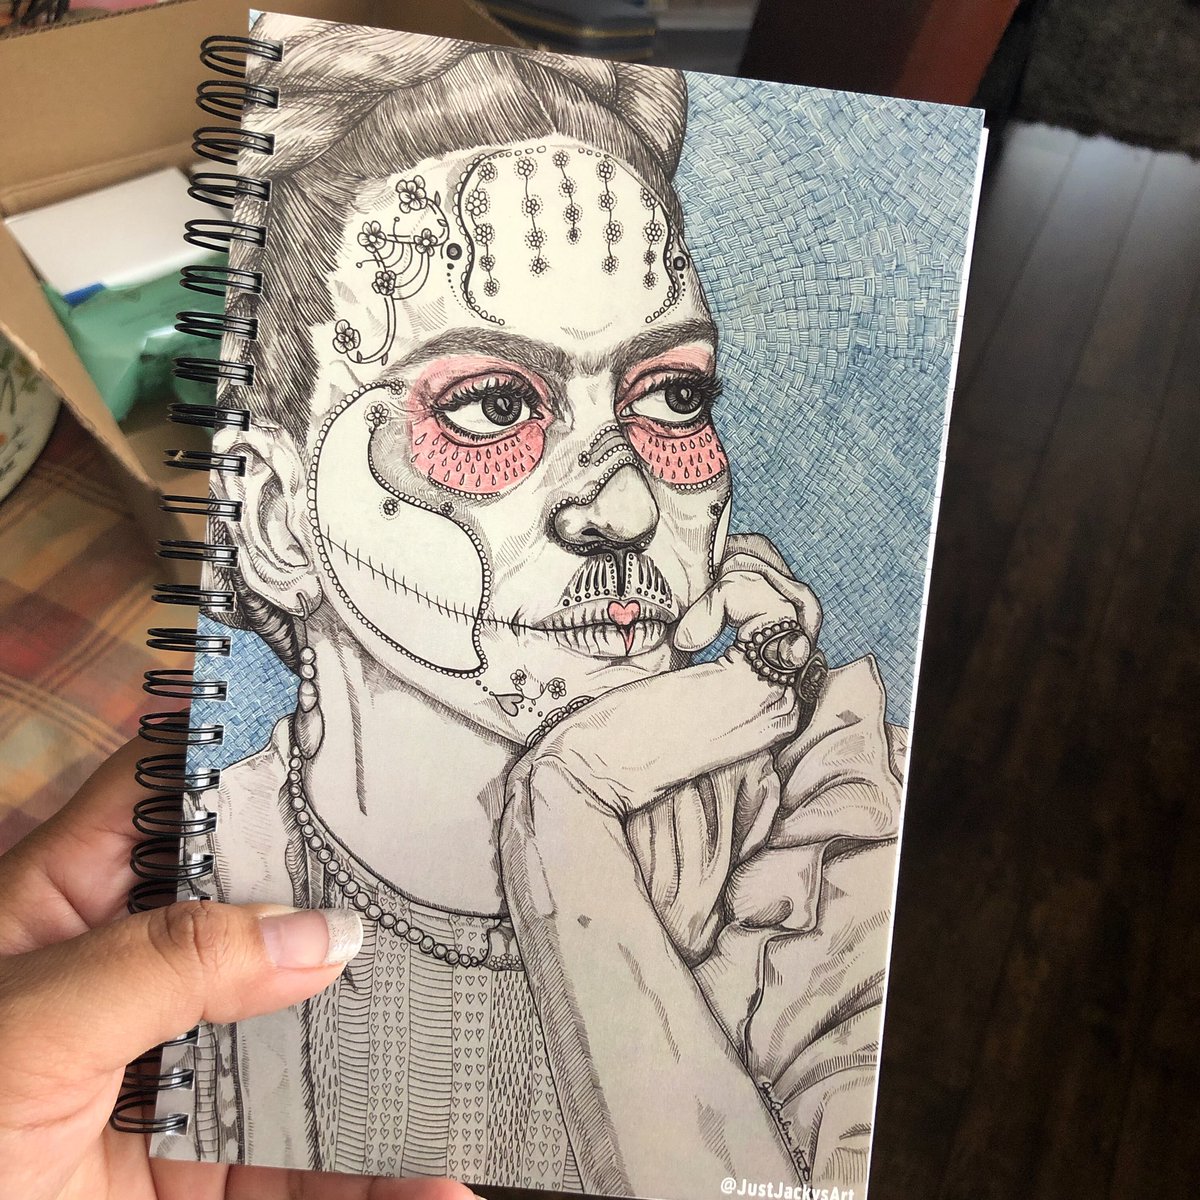 She legit cane out gorgeous af 🥰🥰🥰 #notebook #designernotebook #frida #frieda #fridakahlo #friedakahlo #kahlo #paper #chicana #chicanaart #chicanx #chicanxart #chicanxartist #chicanaartist #xicana #xicanaart #xicanaartist #chicano #chicanoart #chicanoartist #momart #momartist